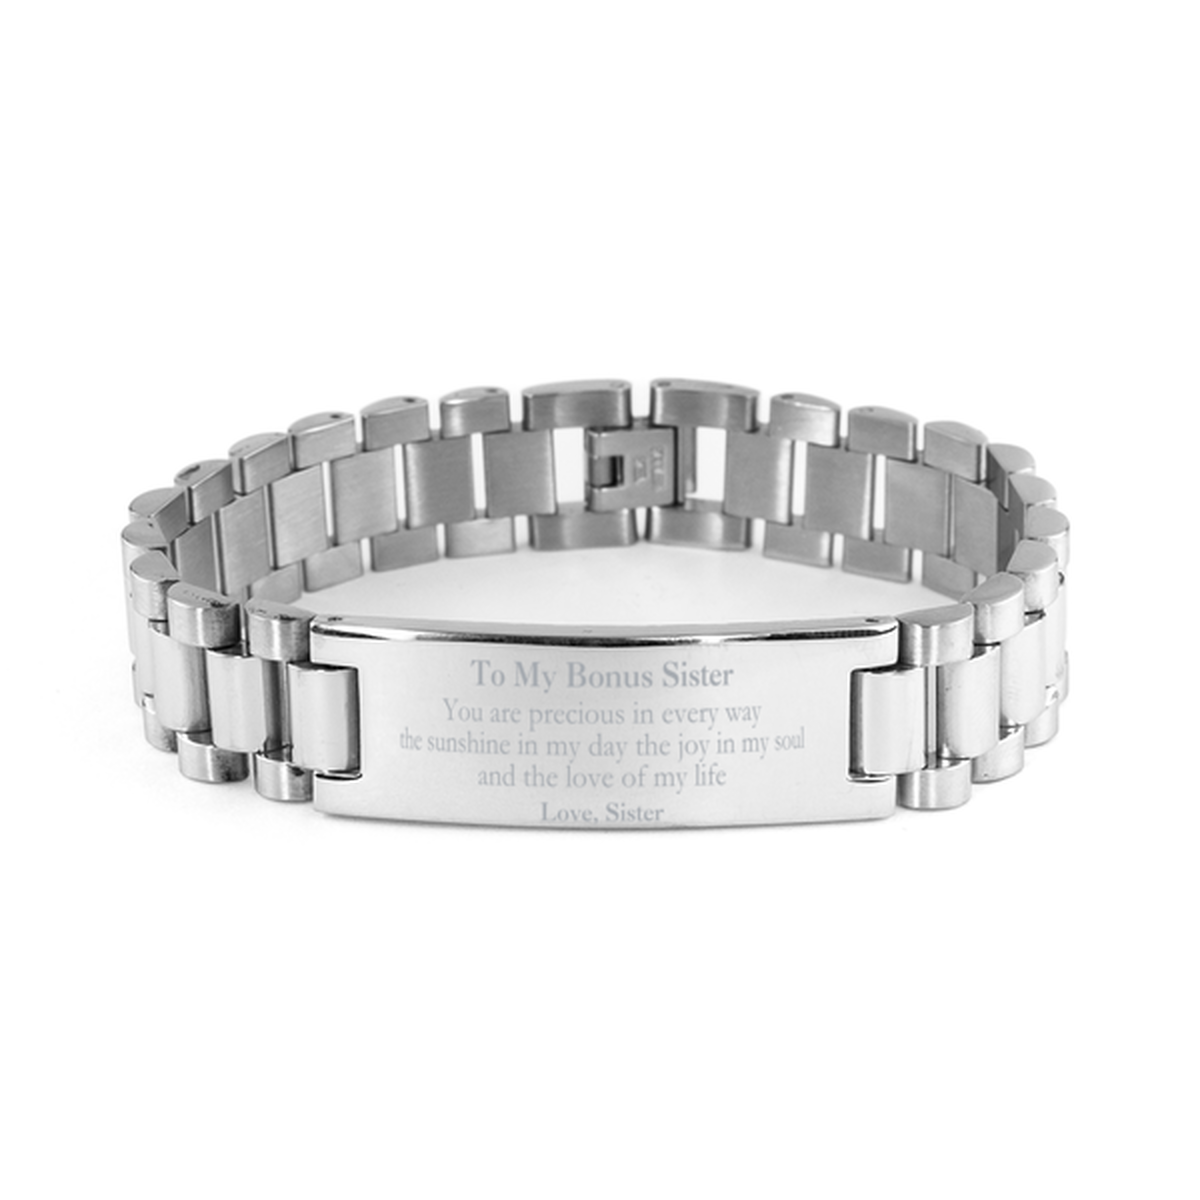 Graduation Gifts for Bonus Sister Ladder Stainless Steel Bracelet Present from Sister, Christmas Bonus Sister Birthday Gifts Bonus Sister You are precious in every way the sunshine in my day. Love, Sister